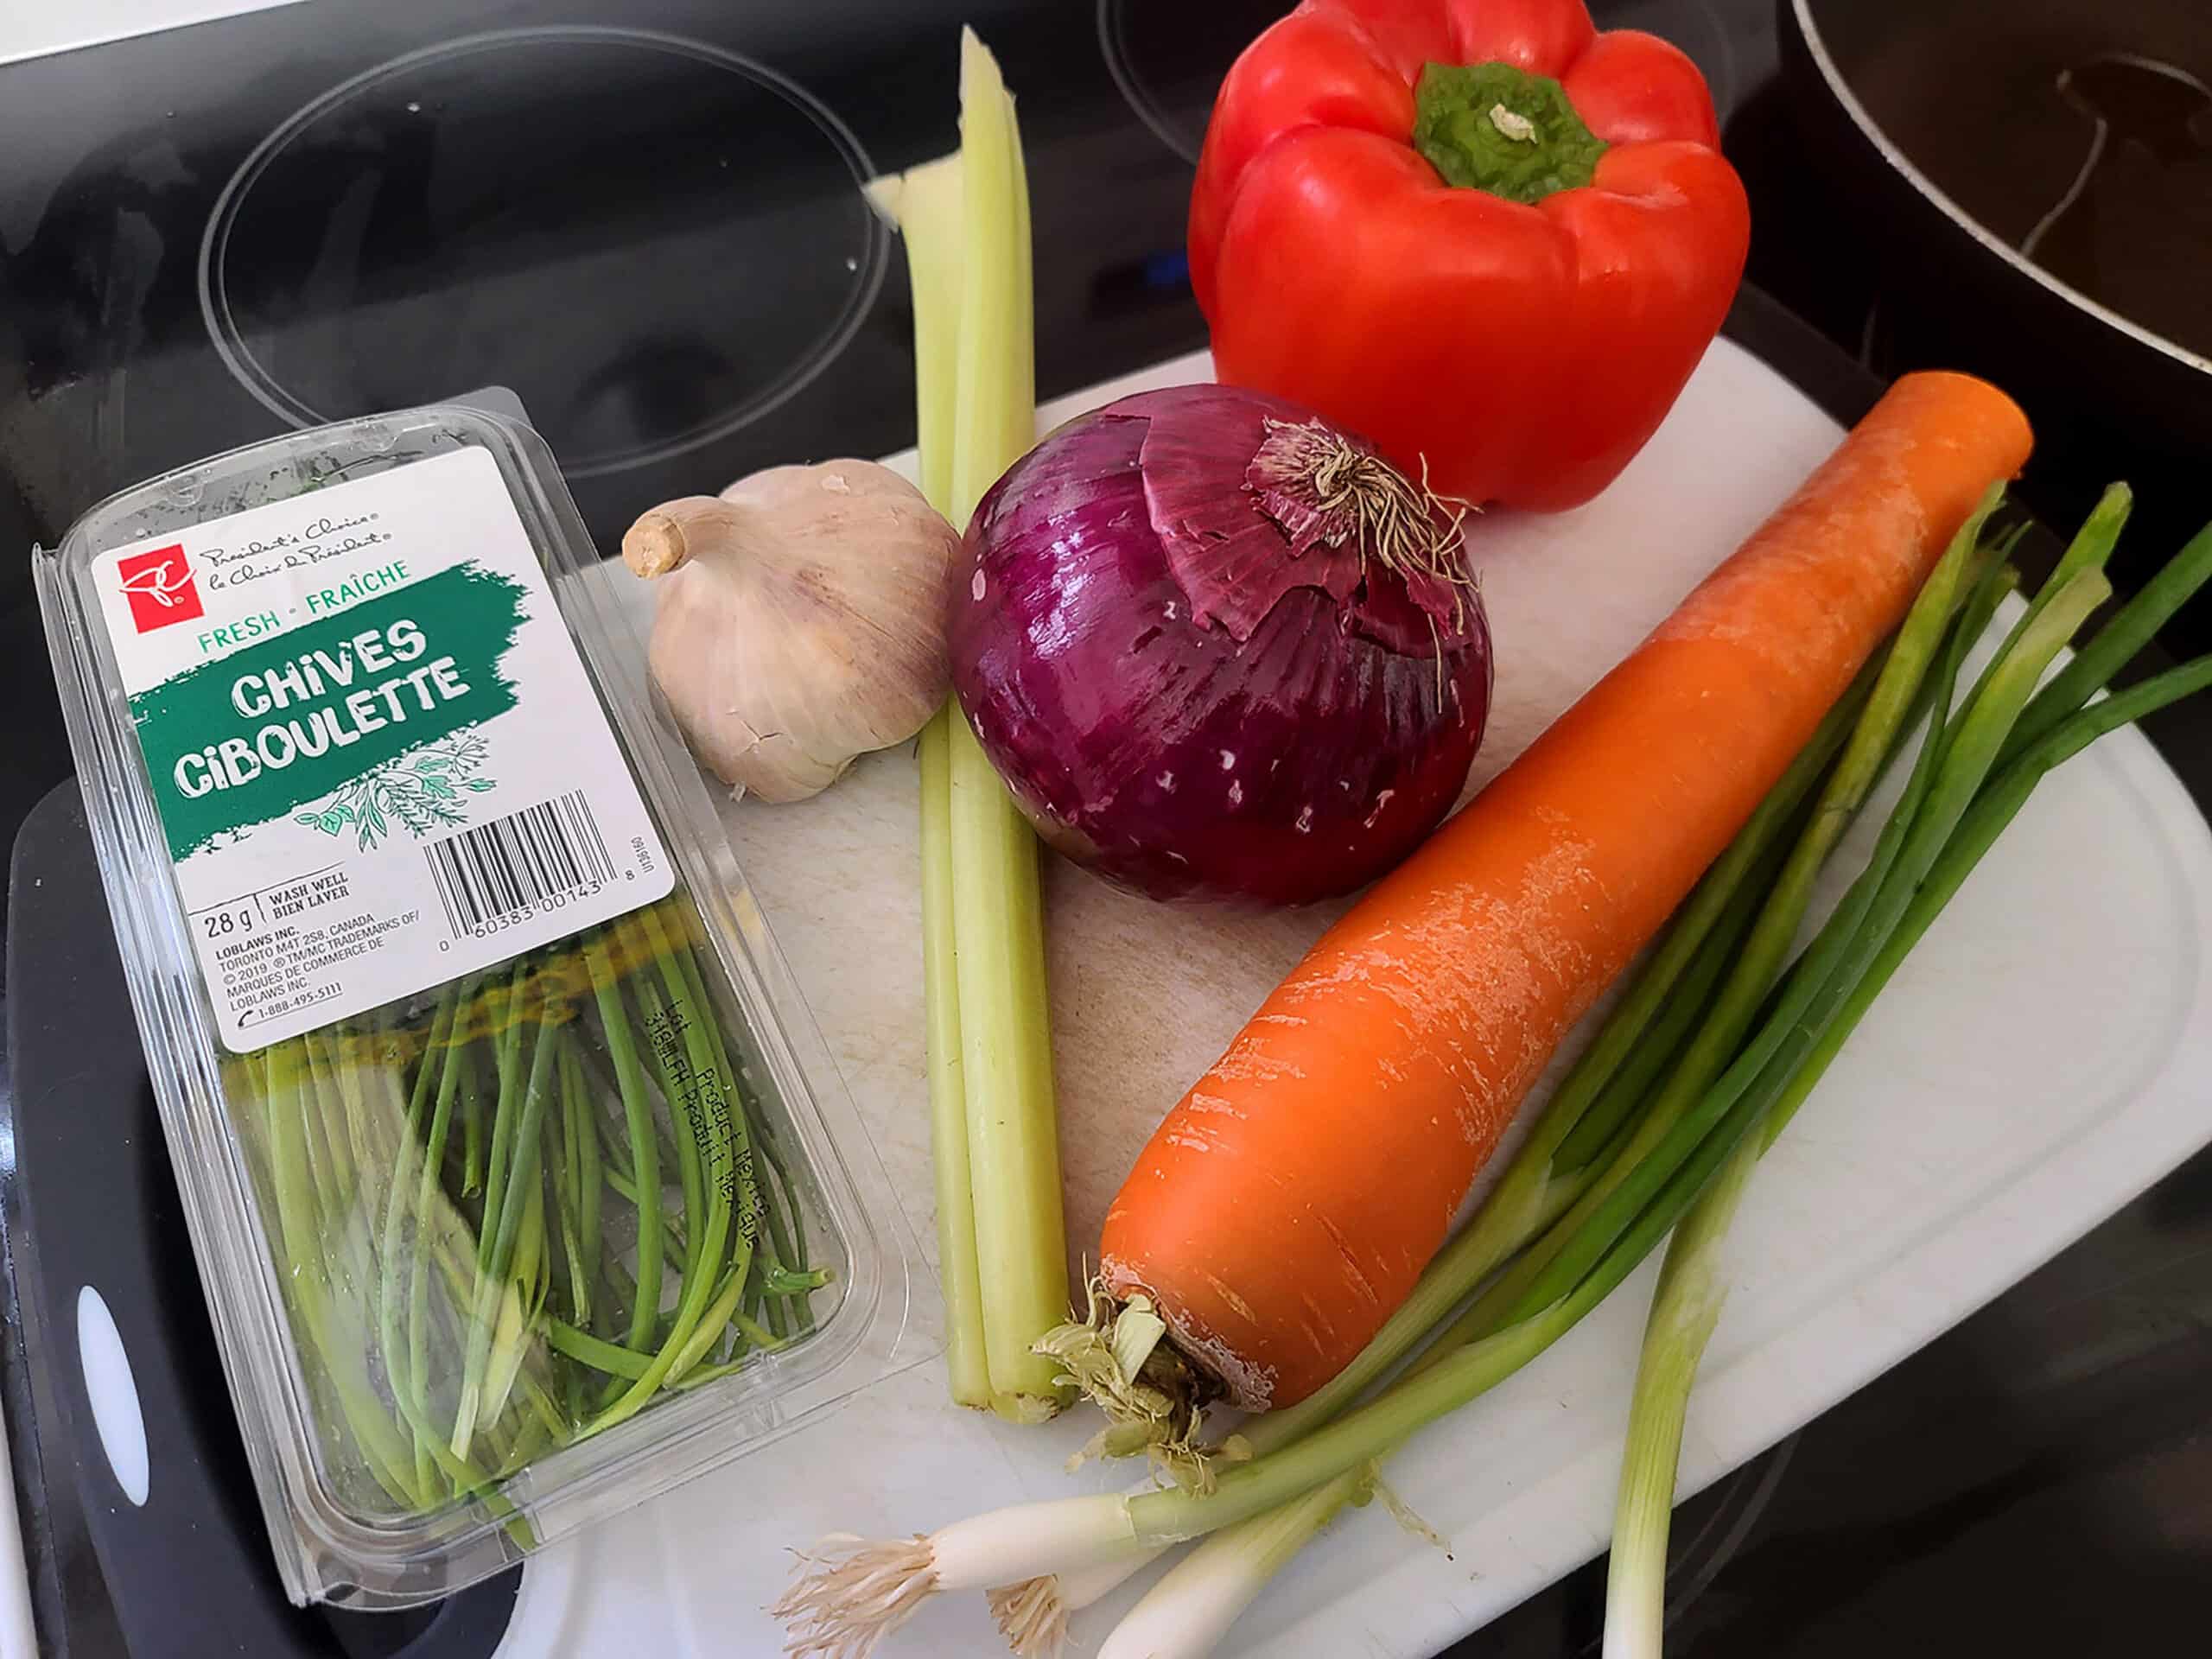 The fresh vegetables and herbs laid out on a cutting board - green onions, chives, carrot, a red onion, a garlic bulb, and a red pepper.